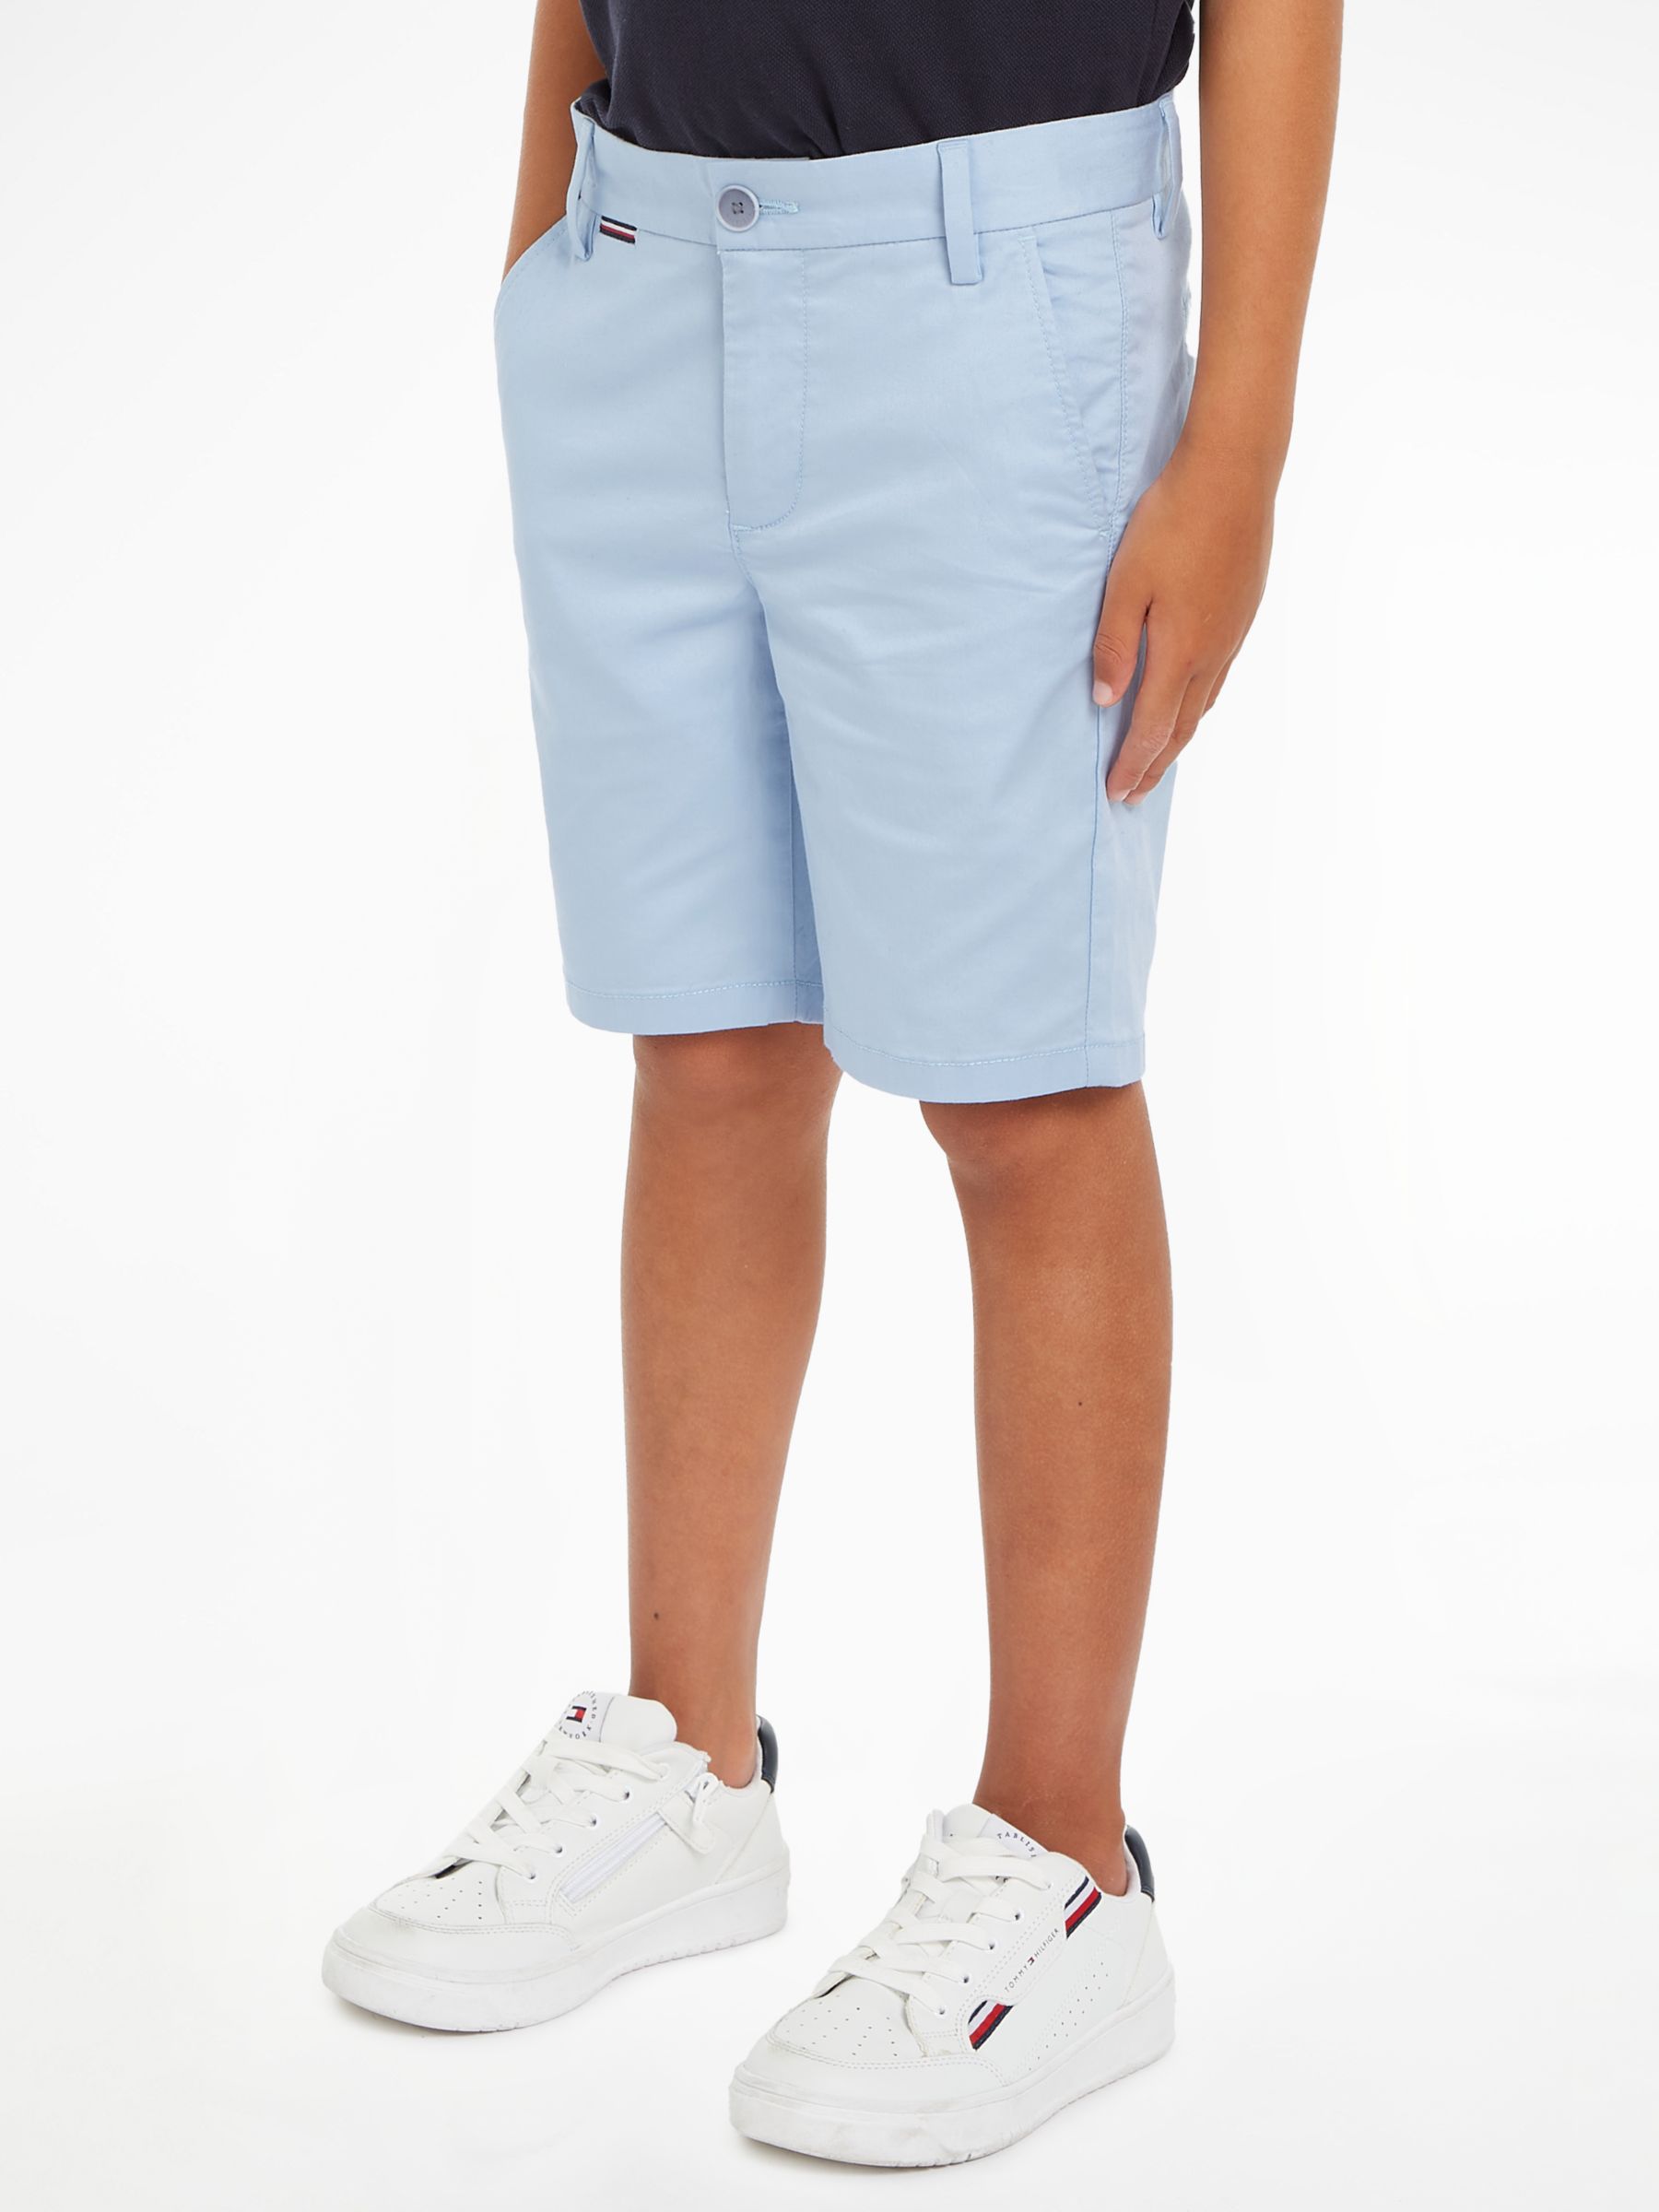 Tommy Hilfiger Kids' 1985 Chino Shorts, Breezy Blue, 10 years